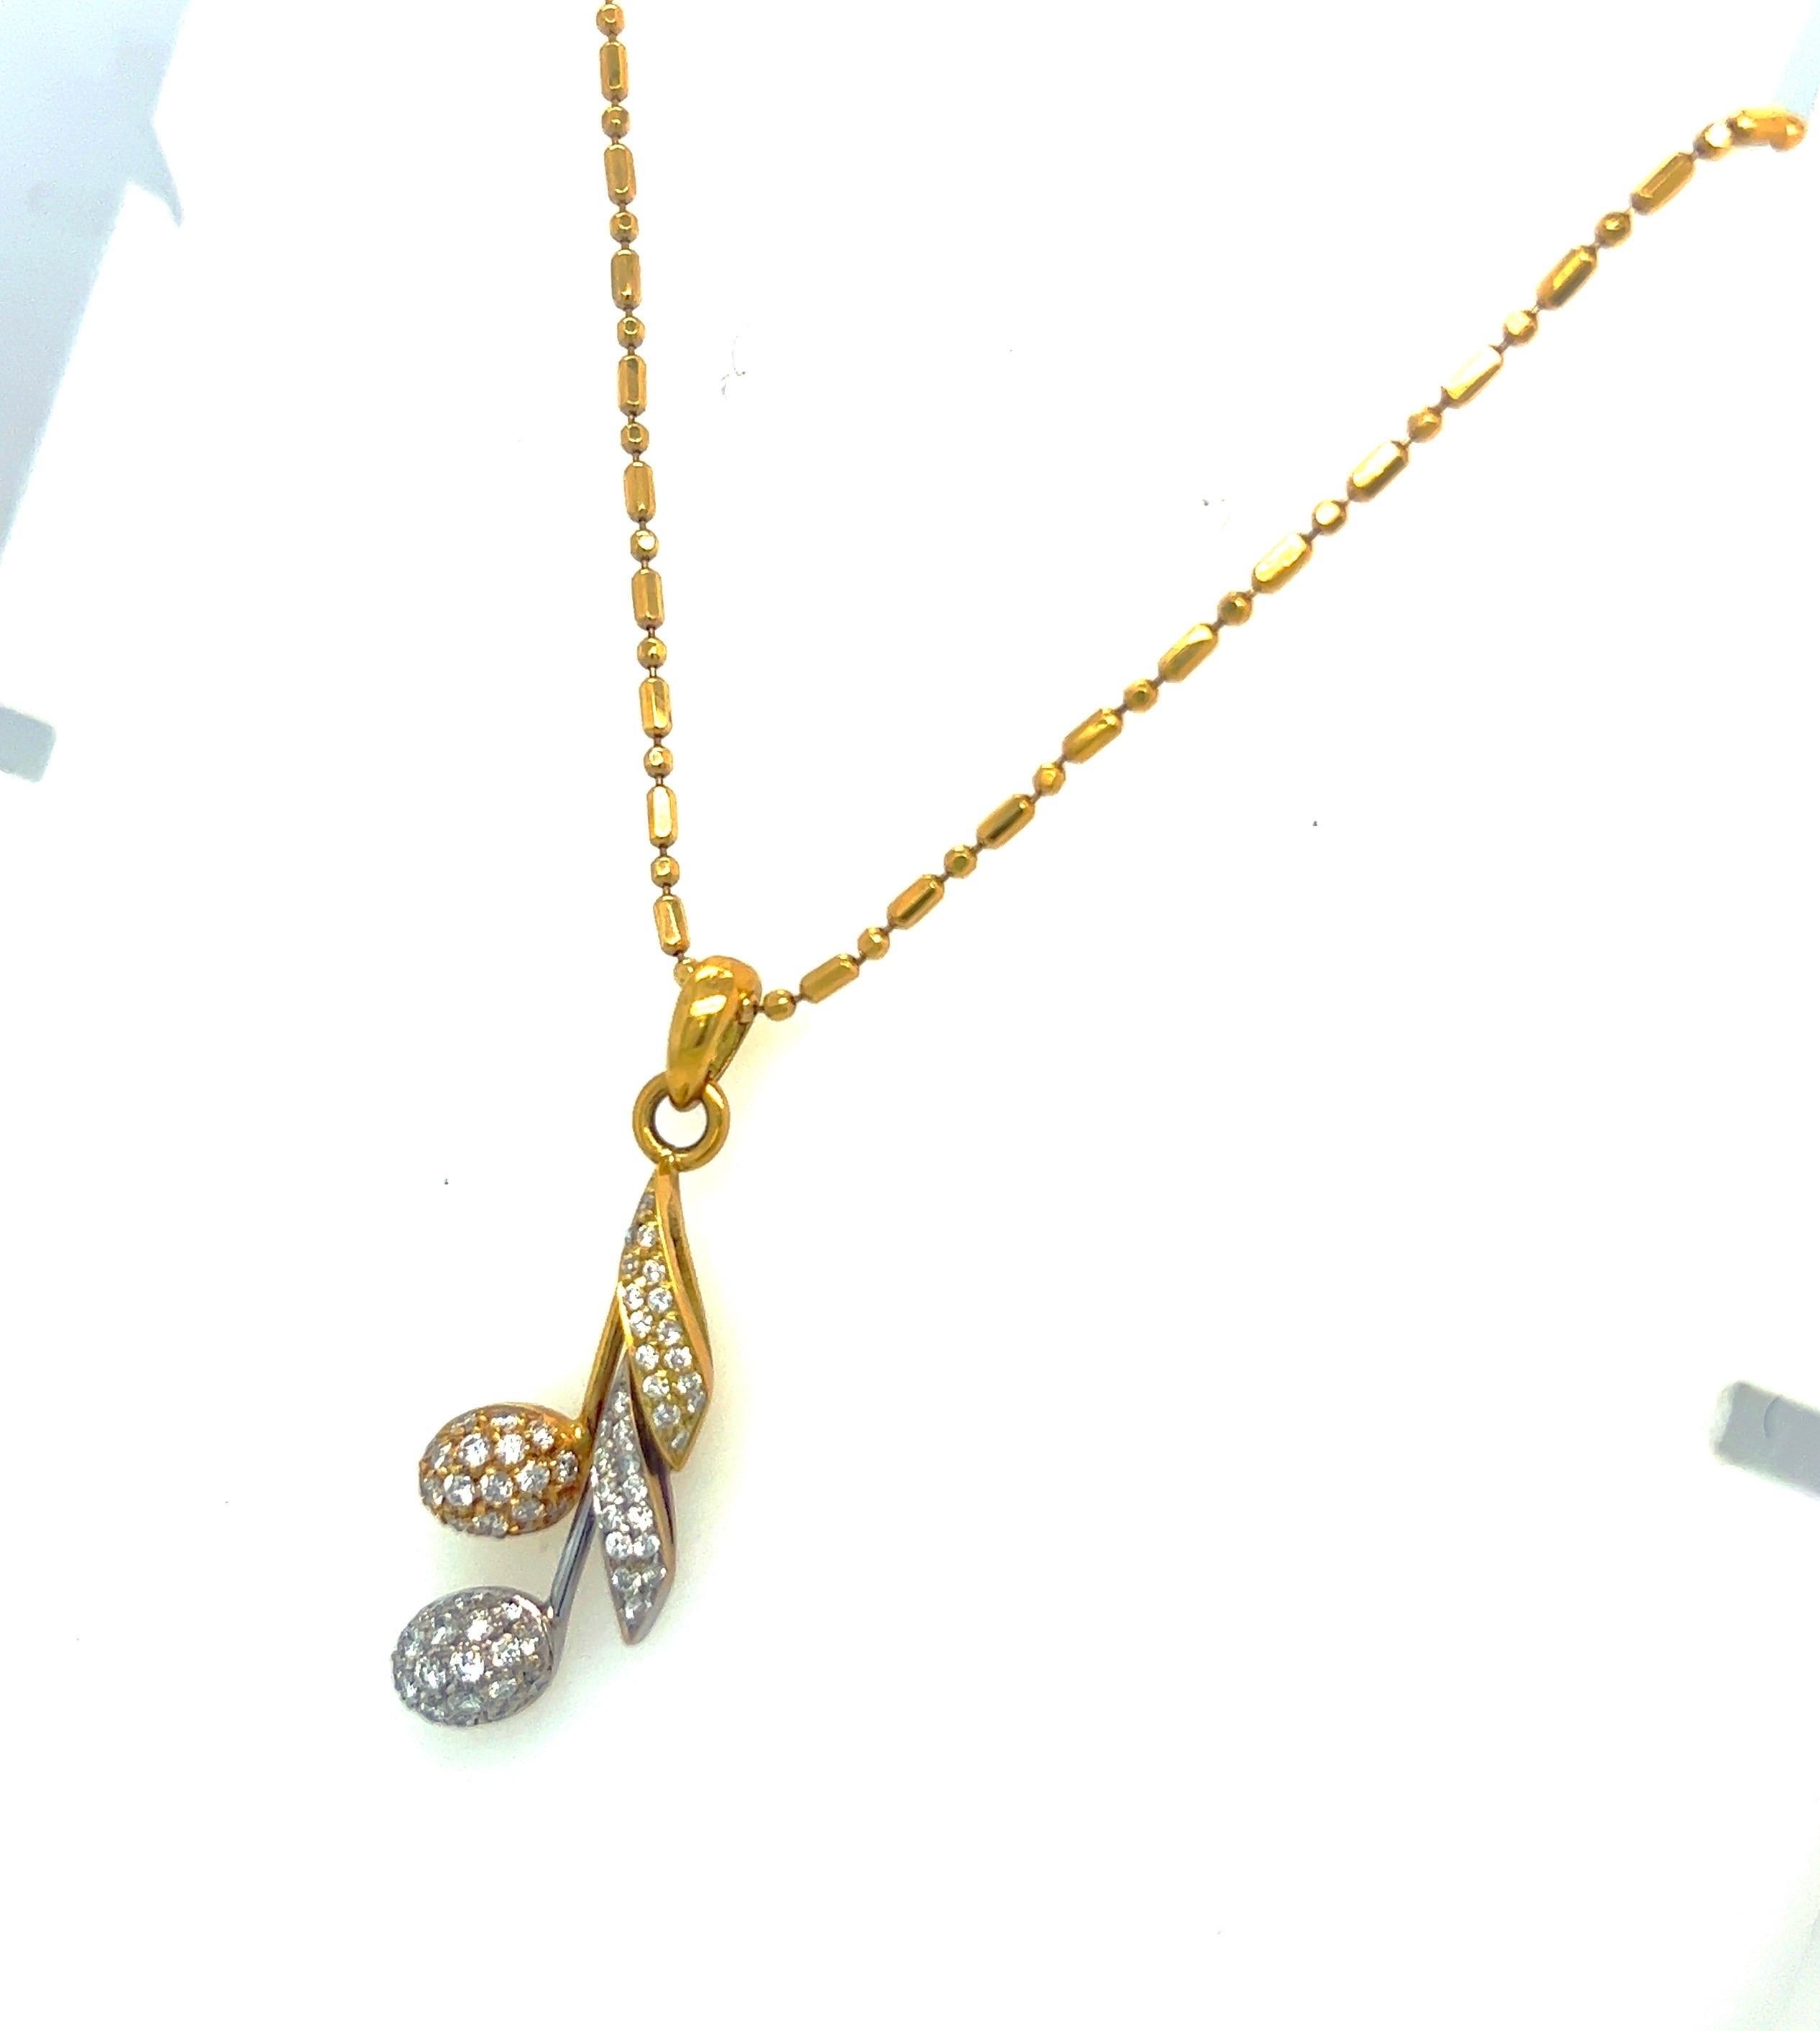 Lovely 18 karat yellow and white gold pendant necklace. The musical note pendant is set with diamonds, total weight of 0.88 carats., and is 1.5